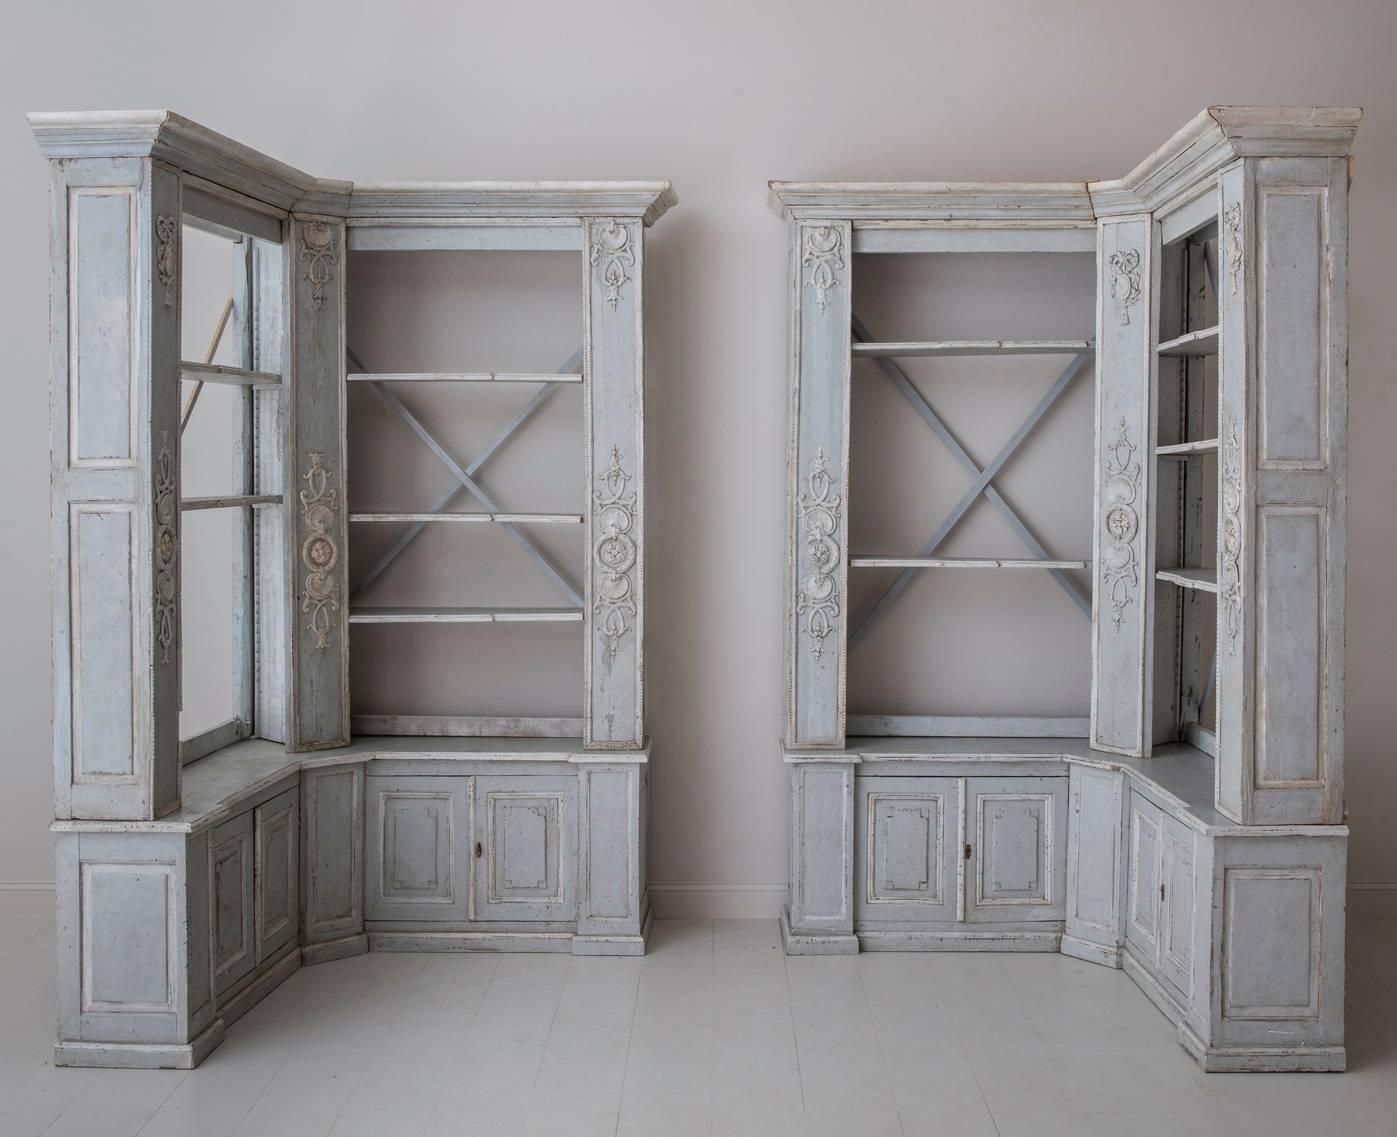 A rare pair of corner bookcases in the Louis XVI style. This piece marries the original 19th century construction of the lower corner cabinets and upper frame with the newer construction of the interior cabinetry and open shelving. Beautifully